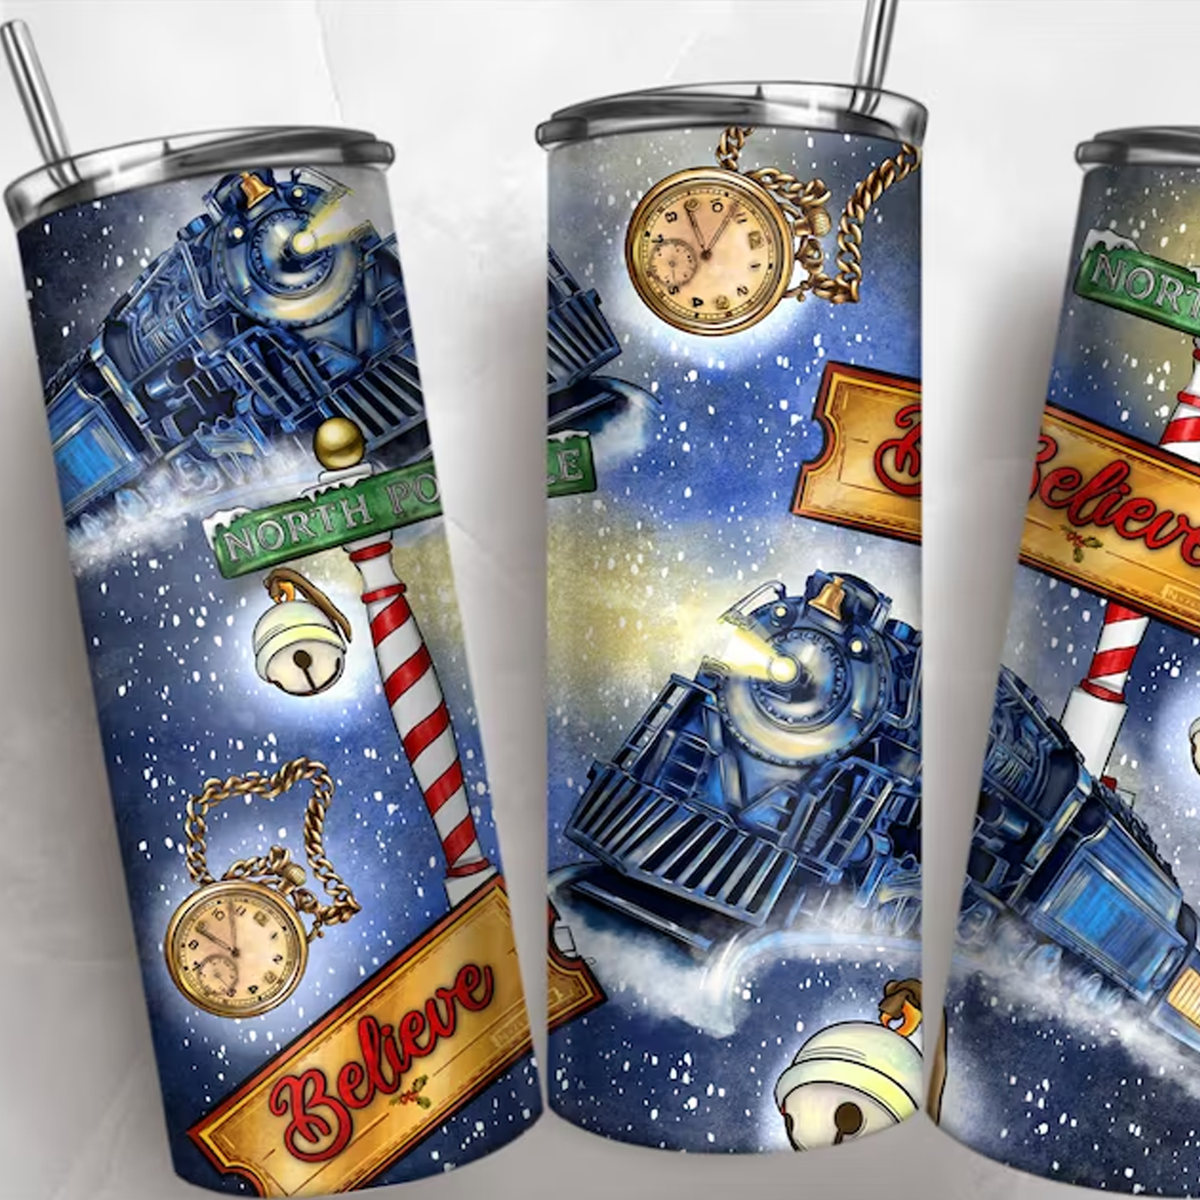 Personalised The Polar Express Double Walled Insulated Thermal Tumbler Cup w/ Metal Straw